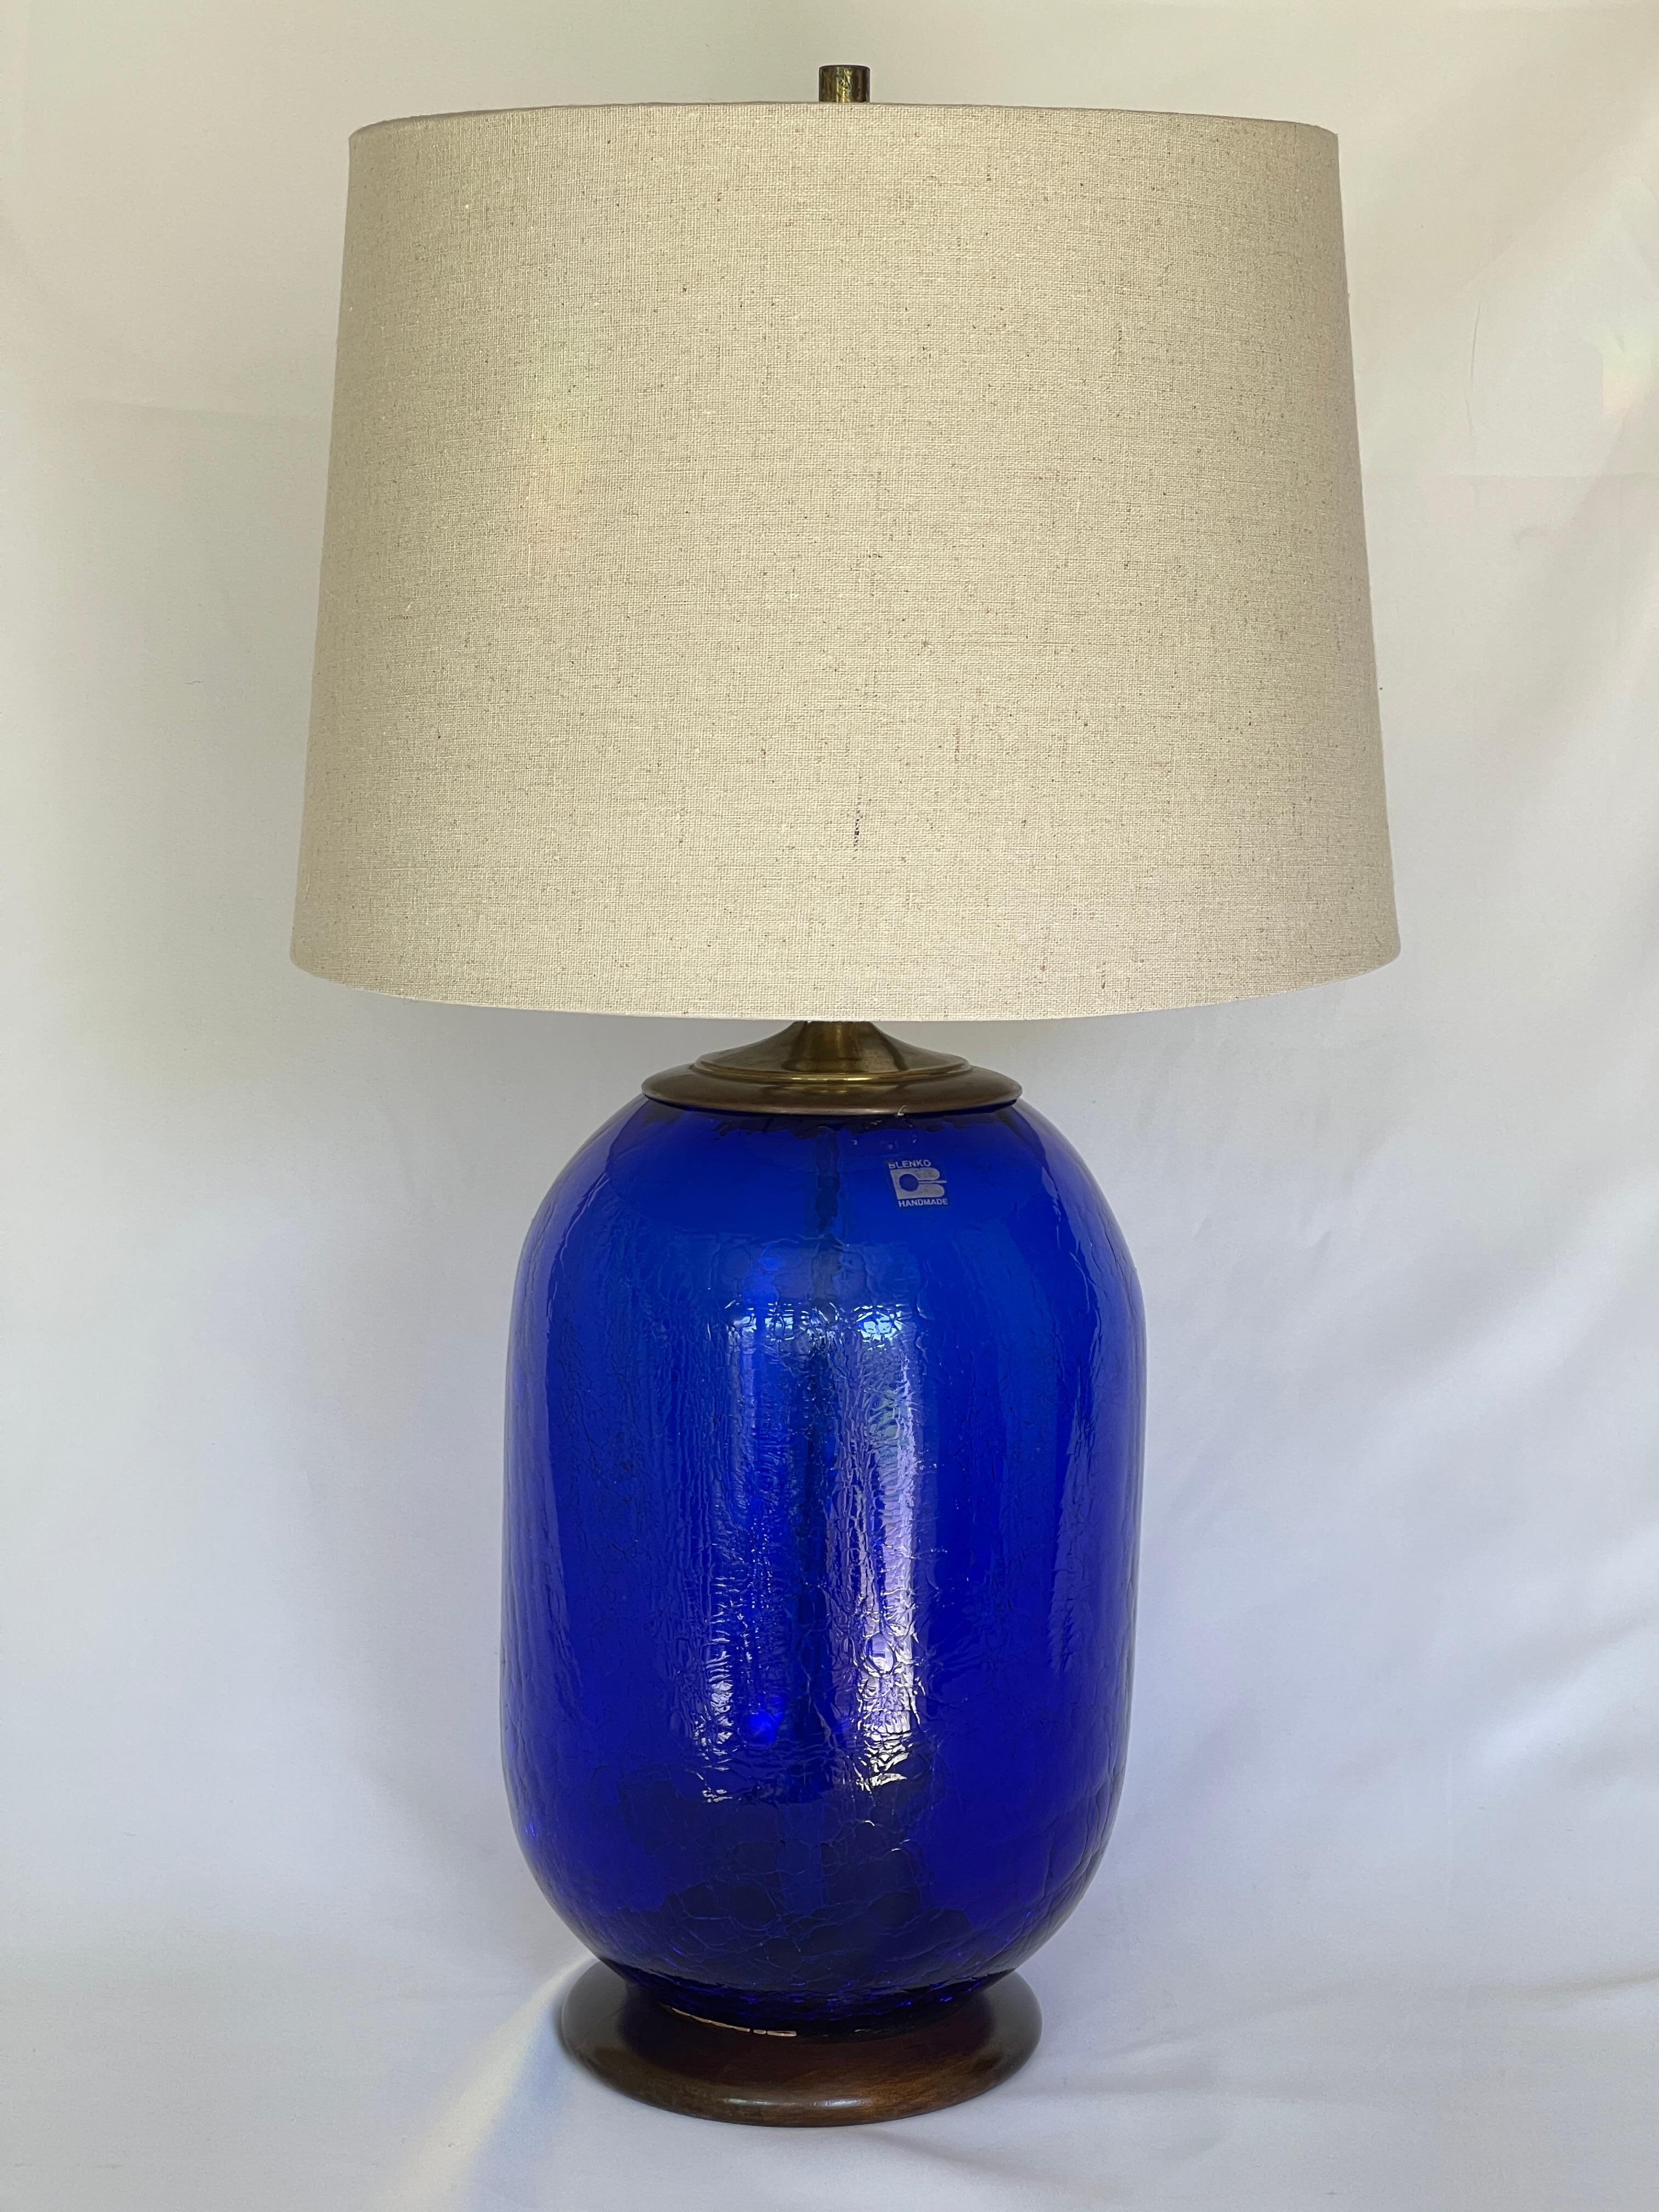 Blenko 1980's crackled blue glass barrel shape lamp with round walnut base.
Original hardware features brass cap and adjustable harp to accommodate multiple heights and lamp shade sizes. Shade not included.
Label sticker affixed to lamp, BLENKO